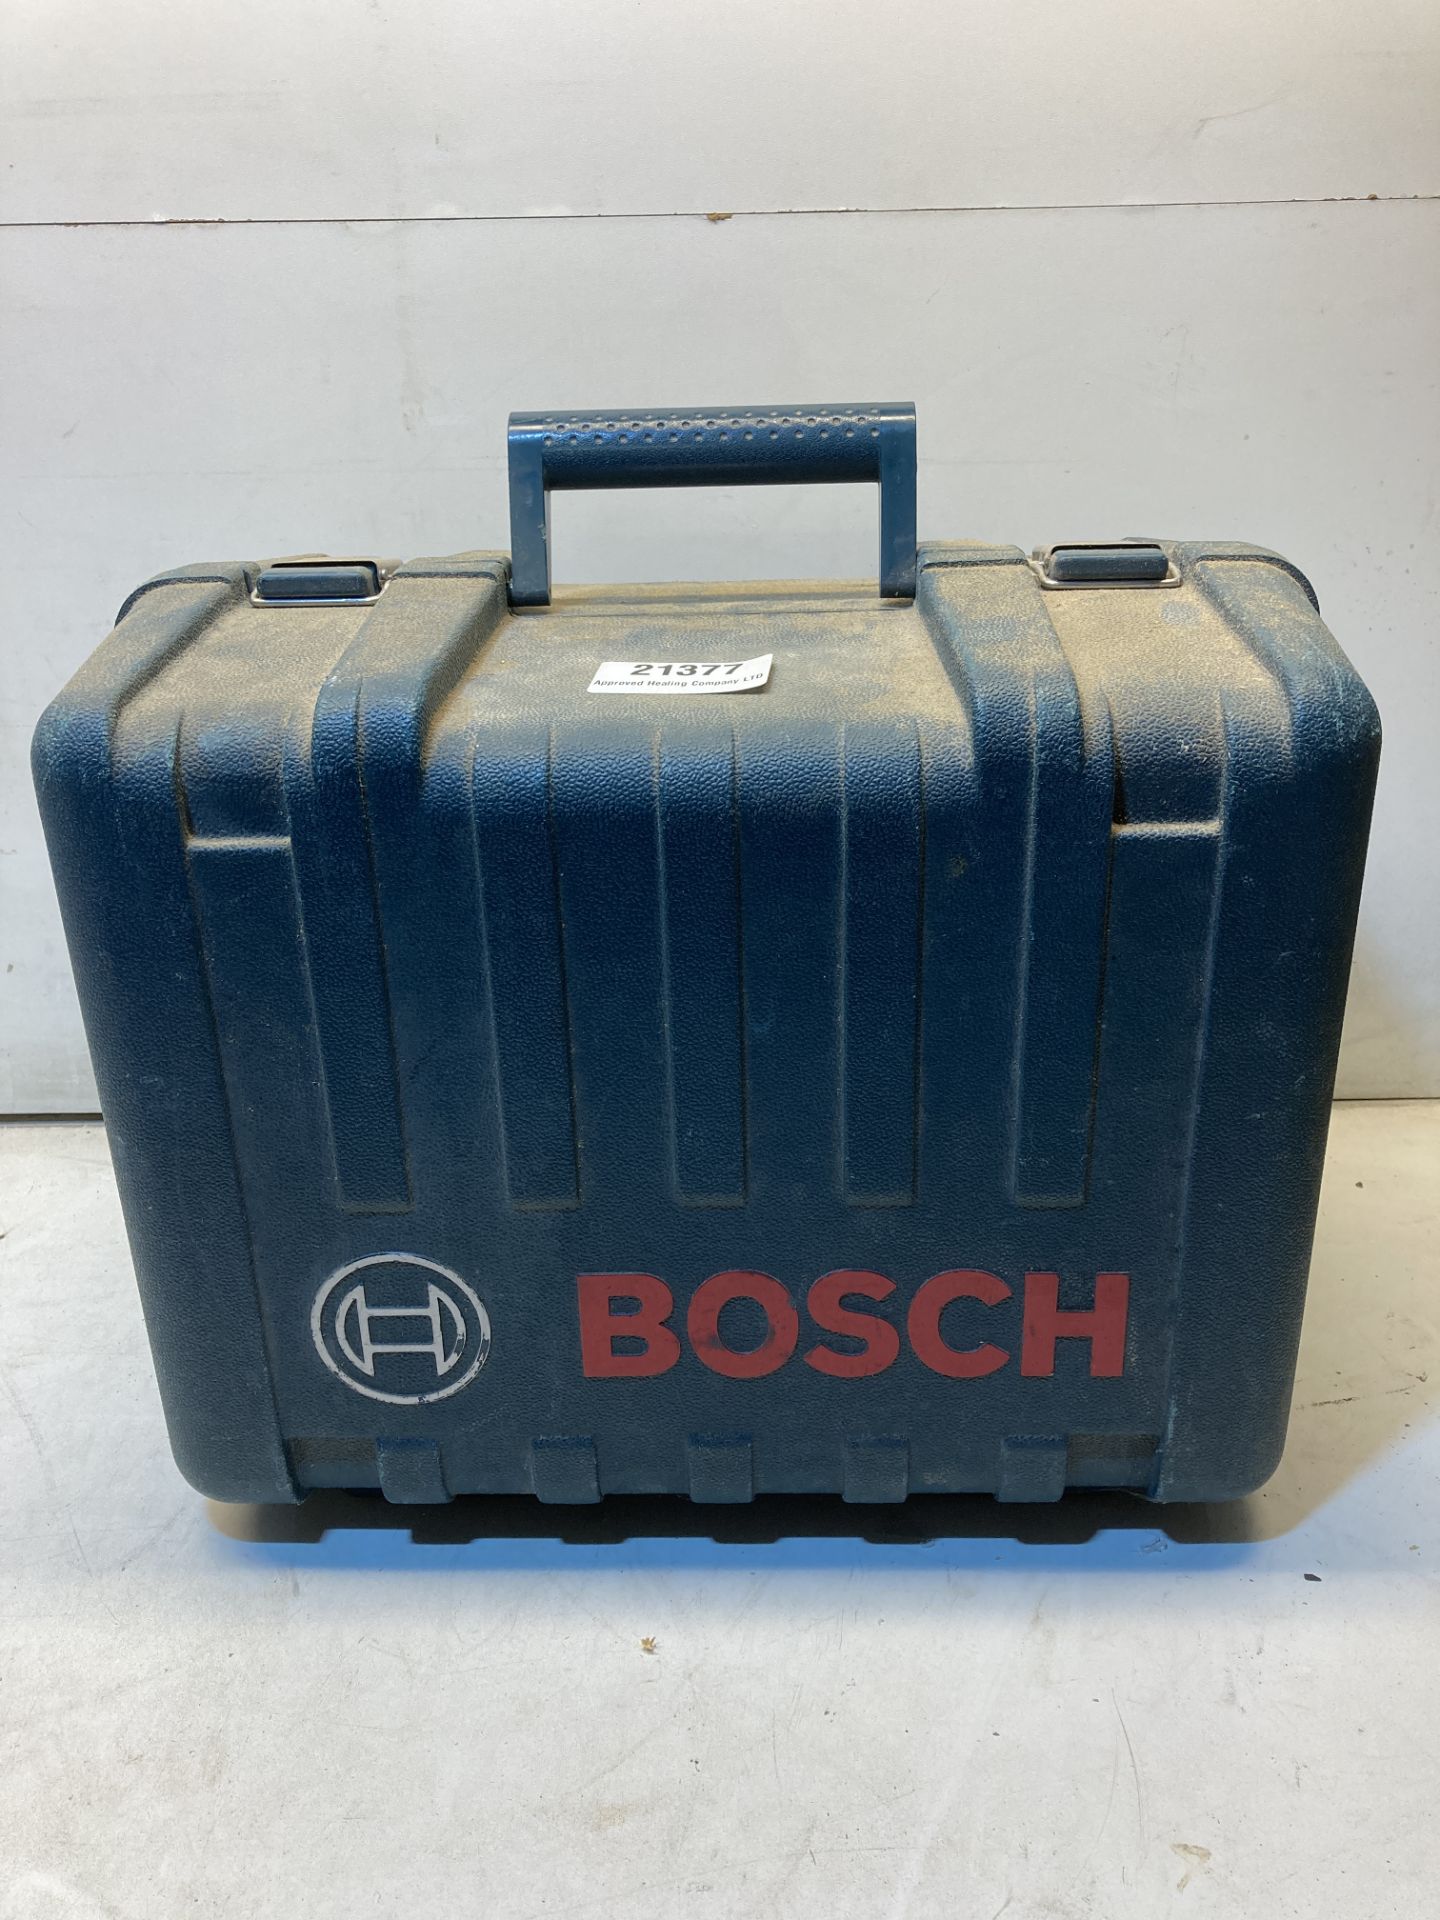 Bosch GKS 190 Circular Saw W/ Carry Case| 240v - Image 6 of 6